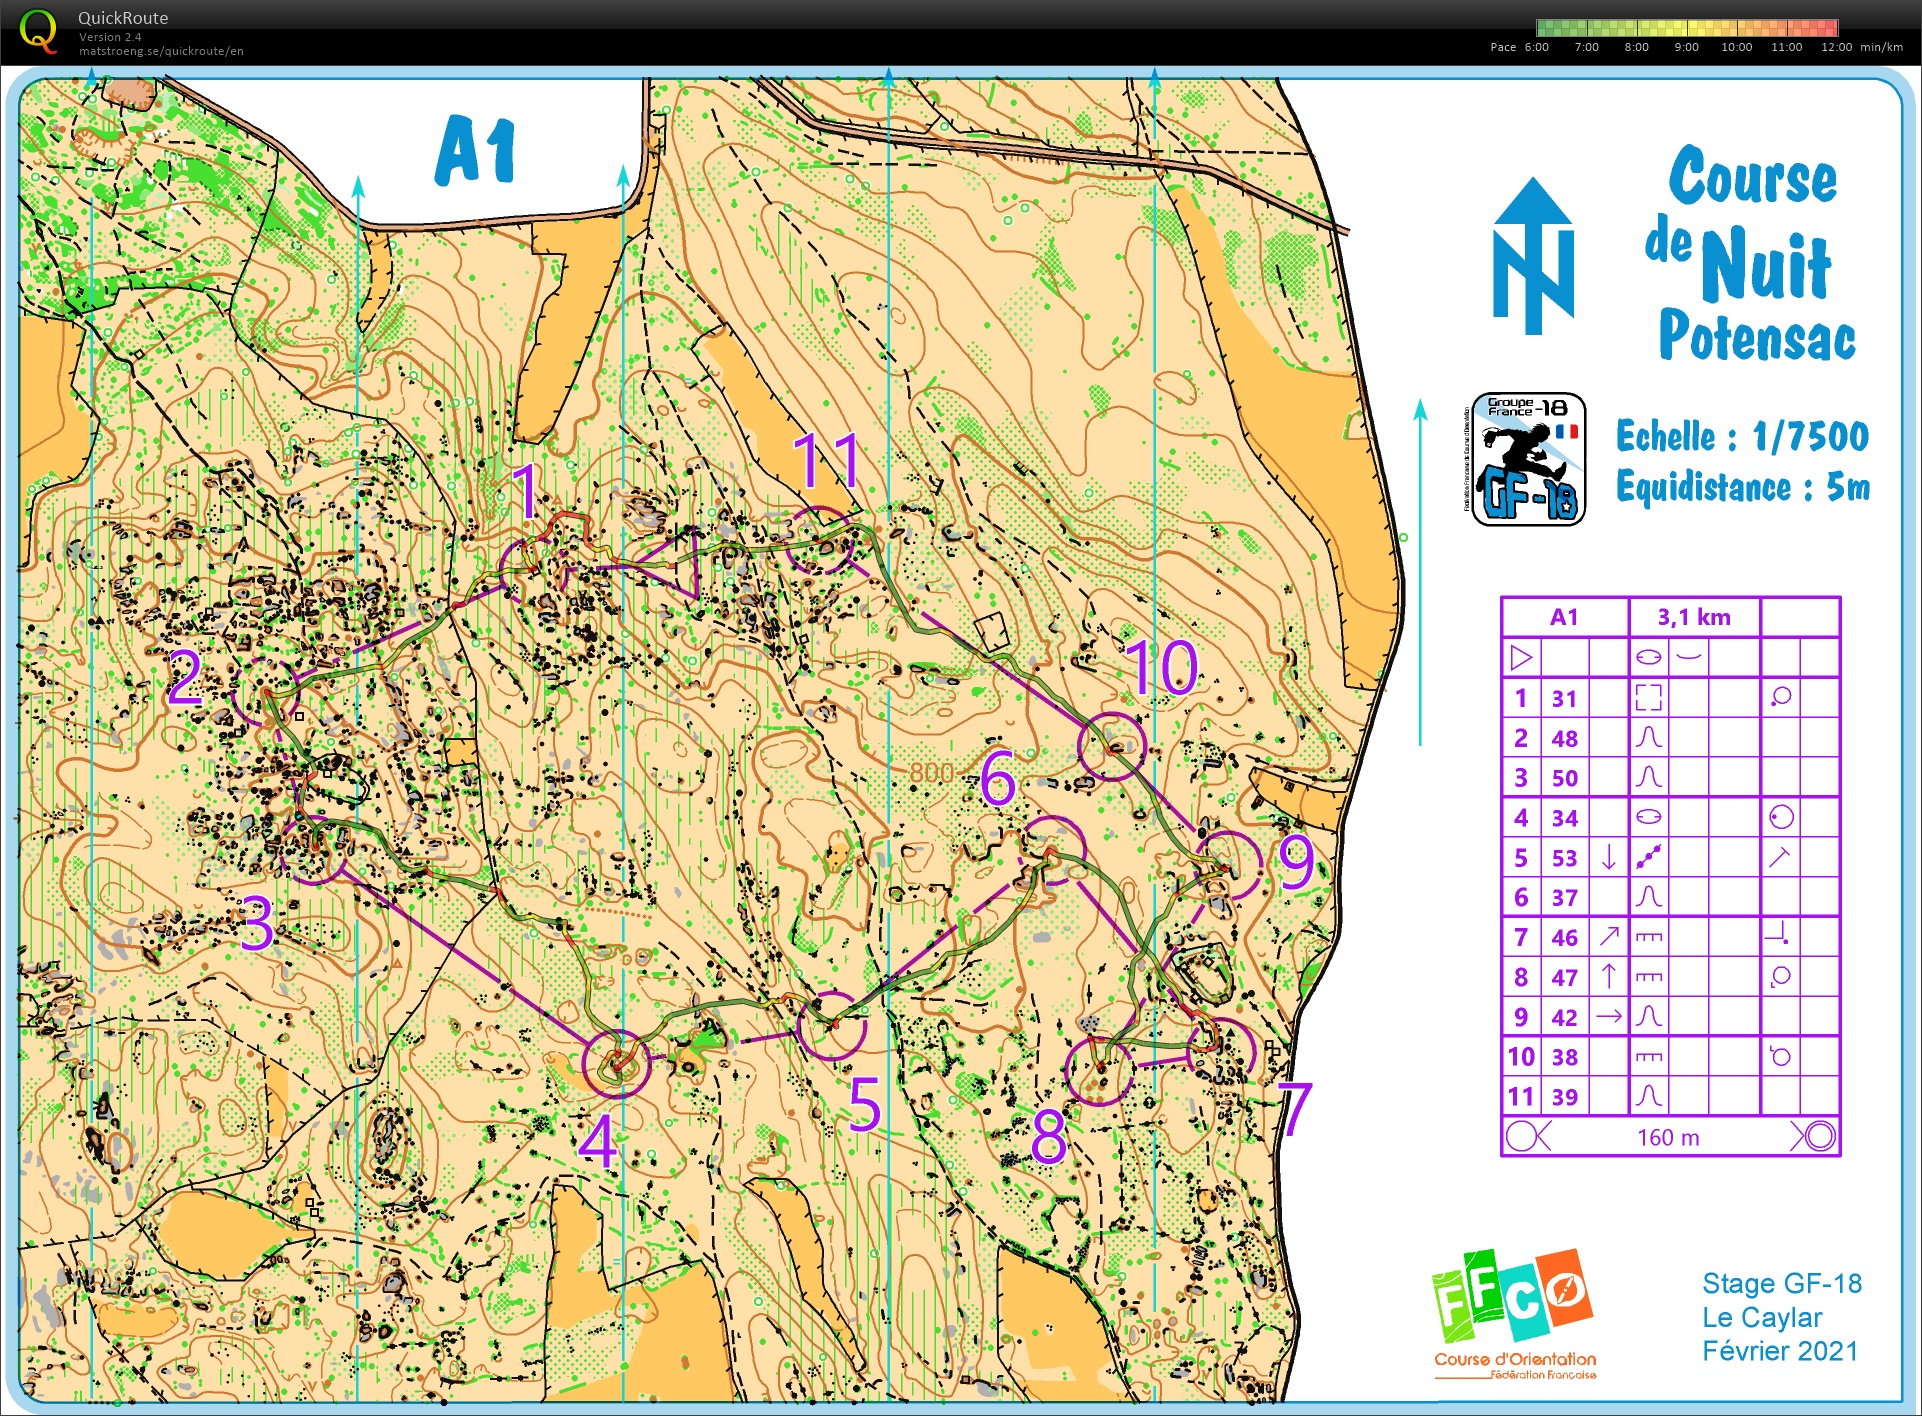 Stage GF-18 Larzac (E5) CO nuit - A1 (07.02.2021)